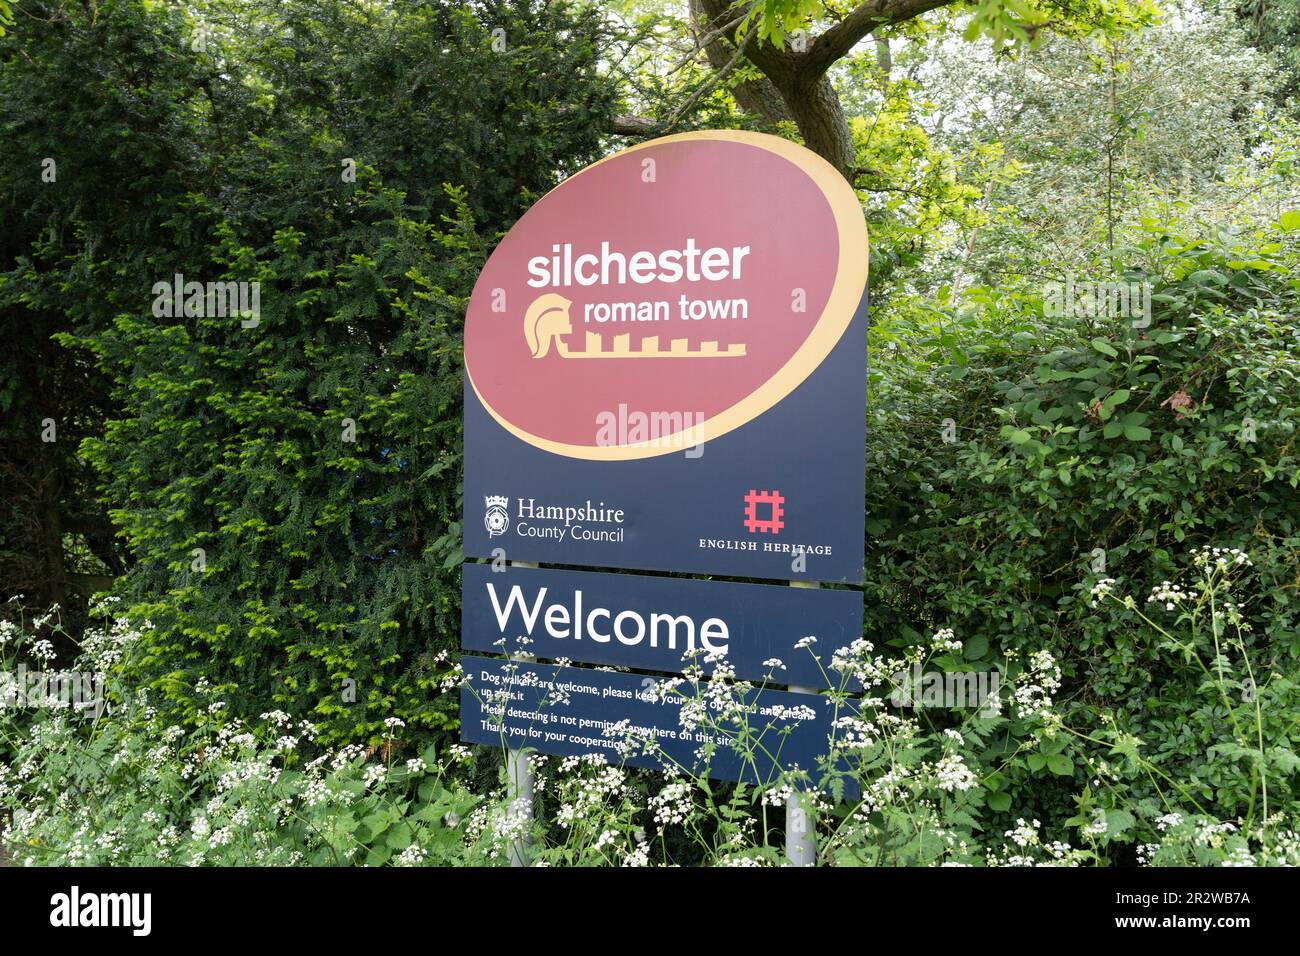 Hampshire County Council and English Heritage welcome to Silchester Roman Town sign. Silchester, Hampshire, England Stock Photo